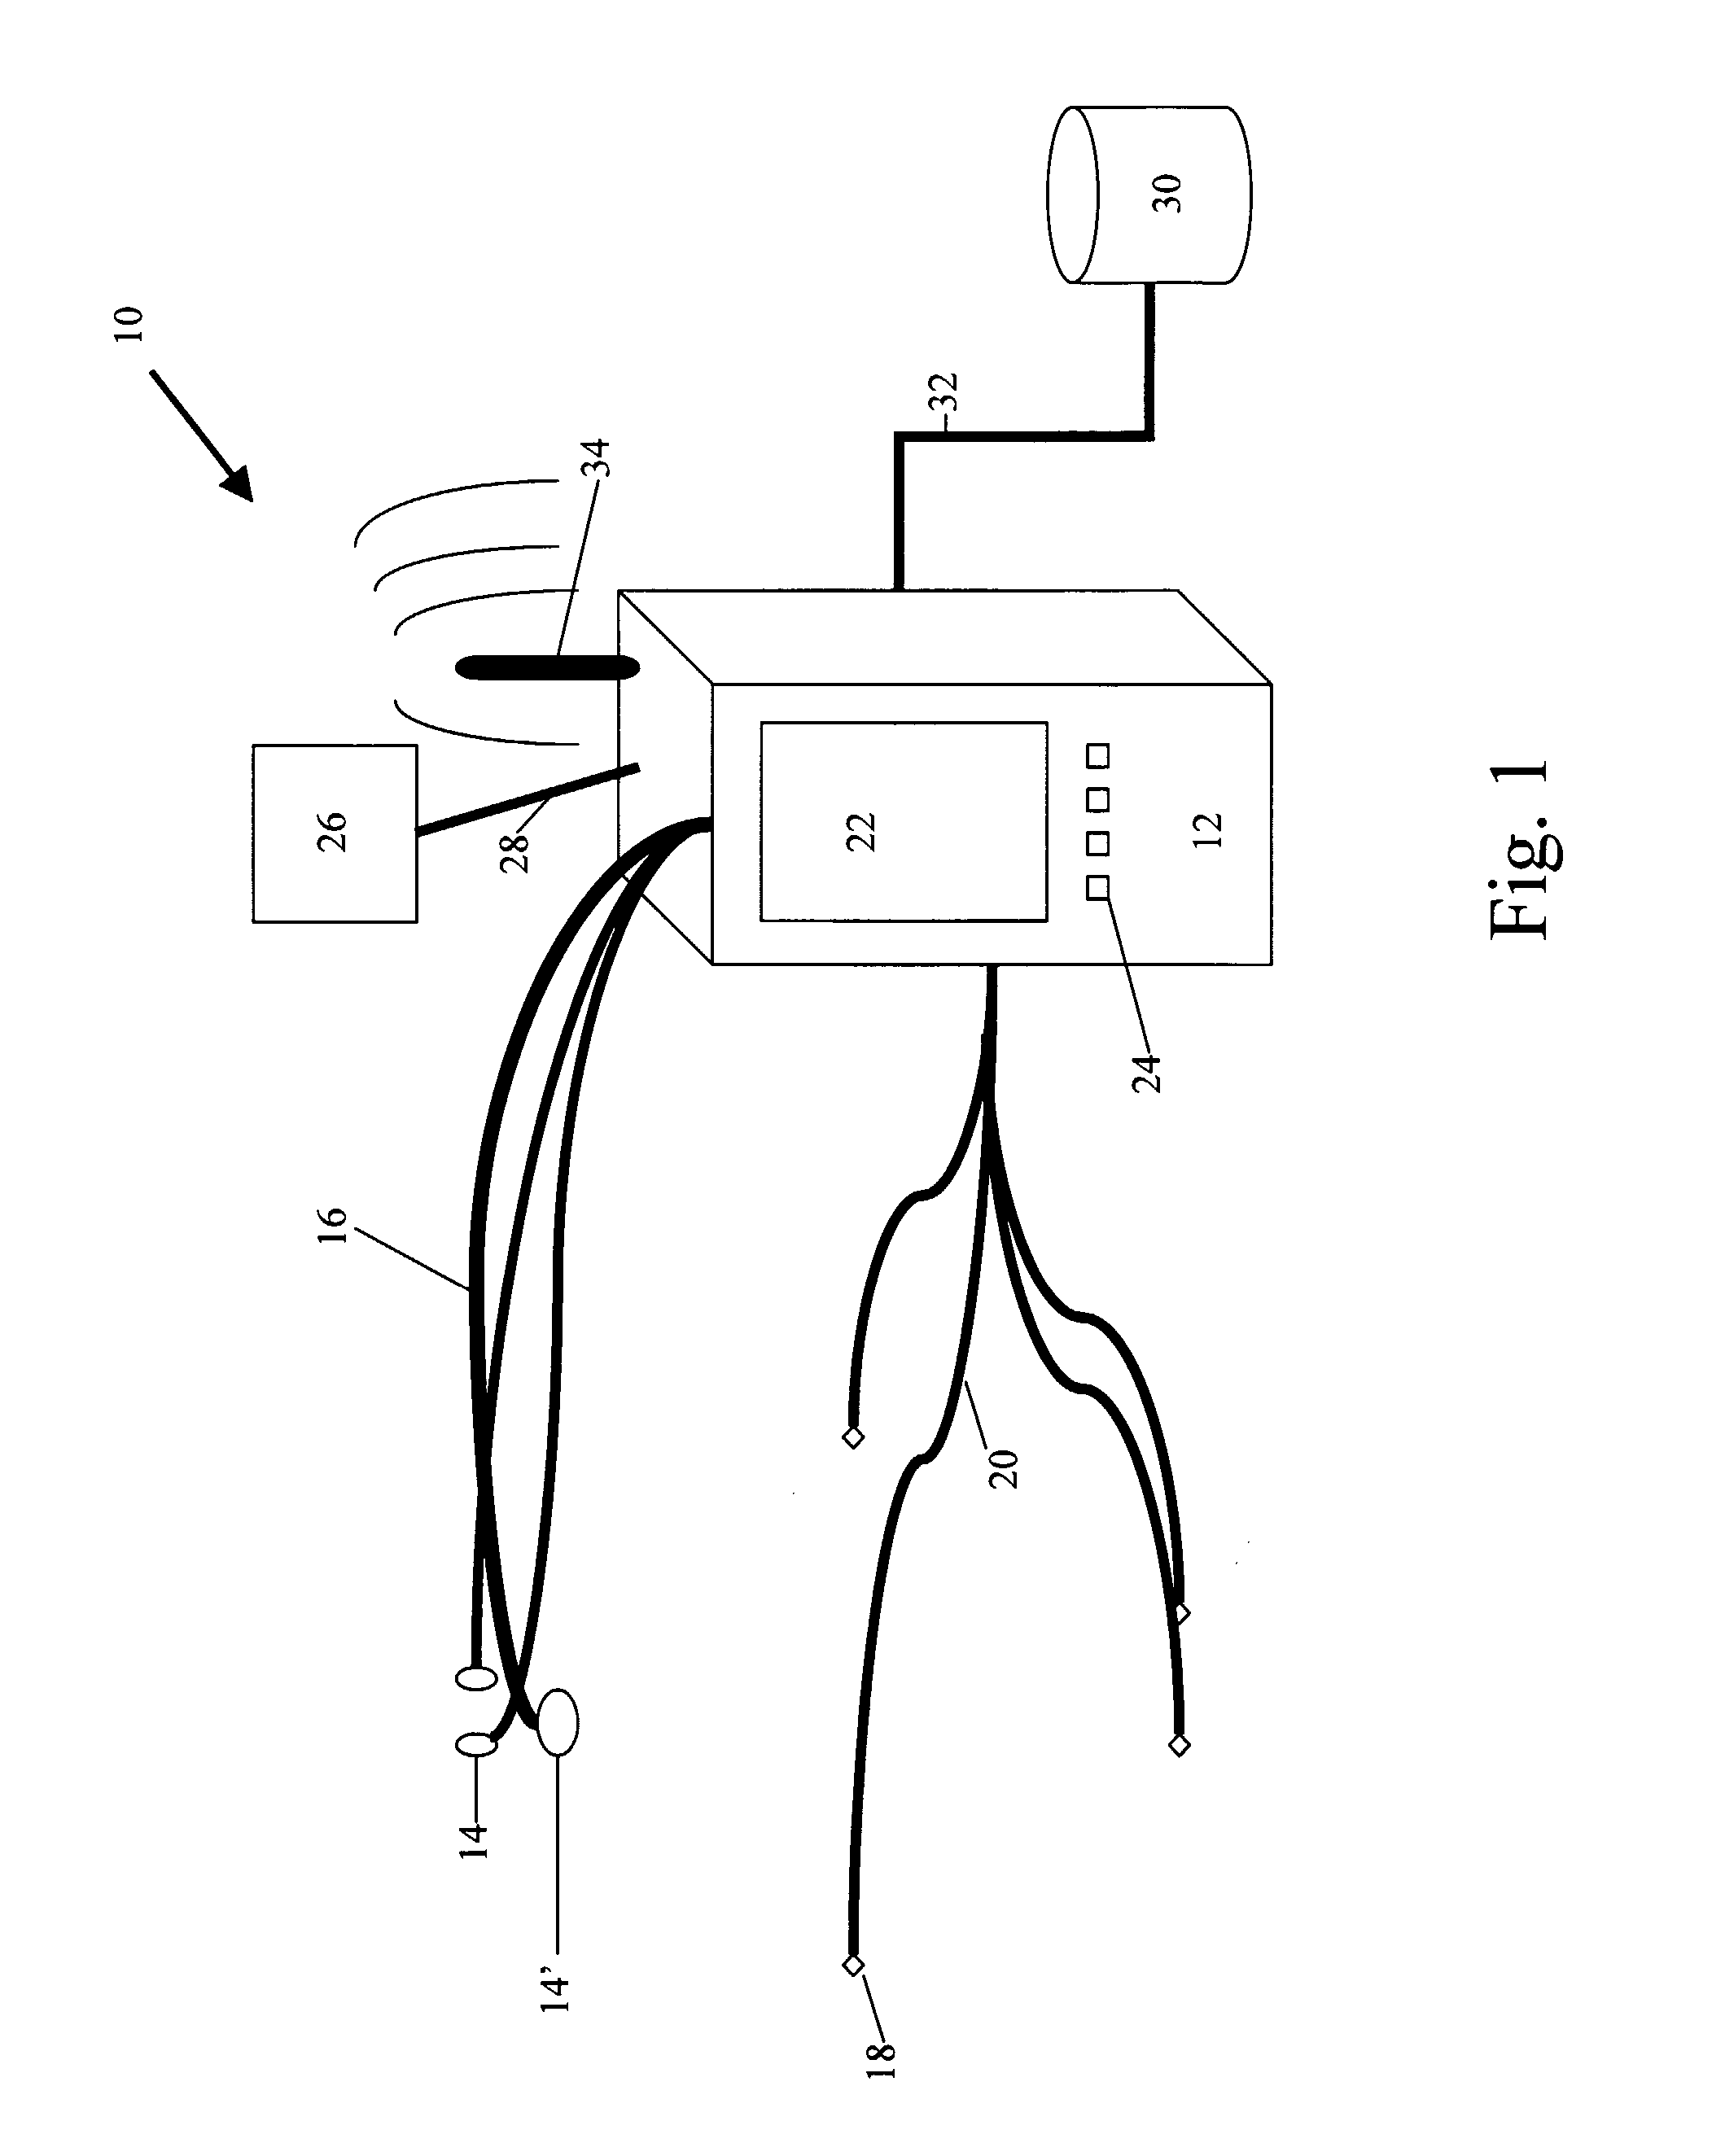 System and method for neurological injury detection, classification and subsequent injury amelioration